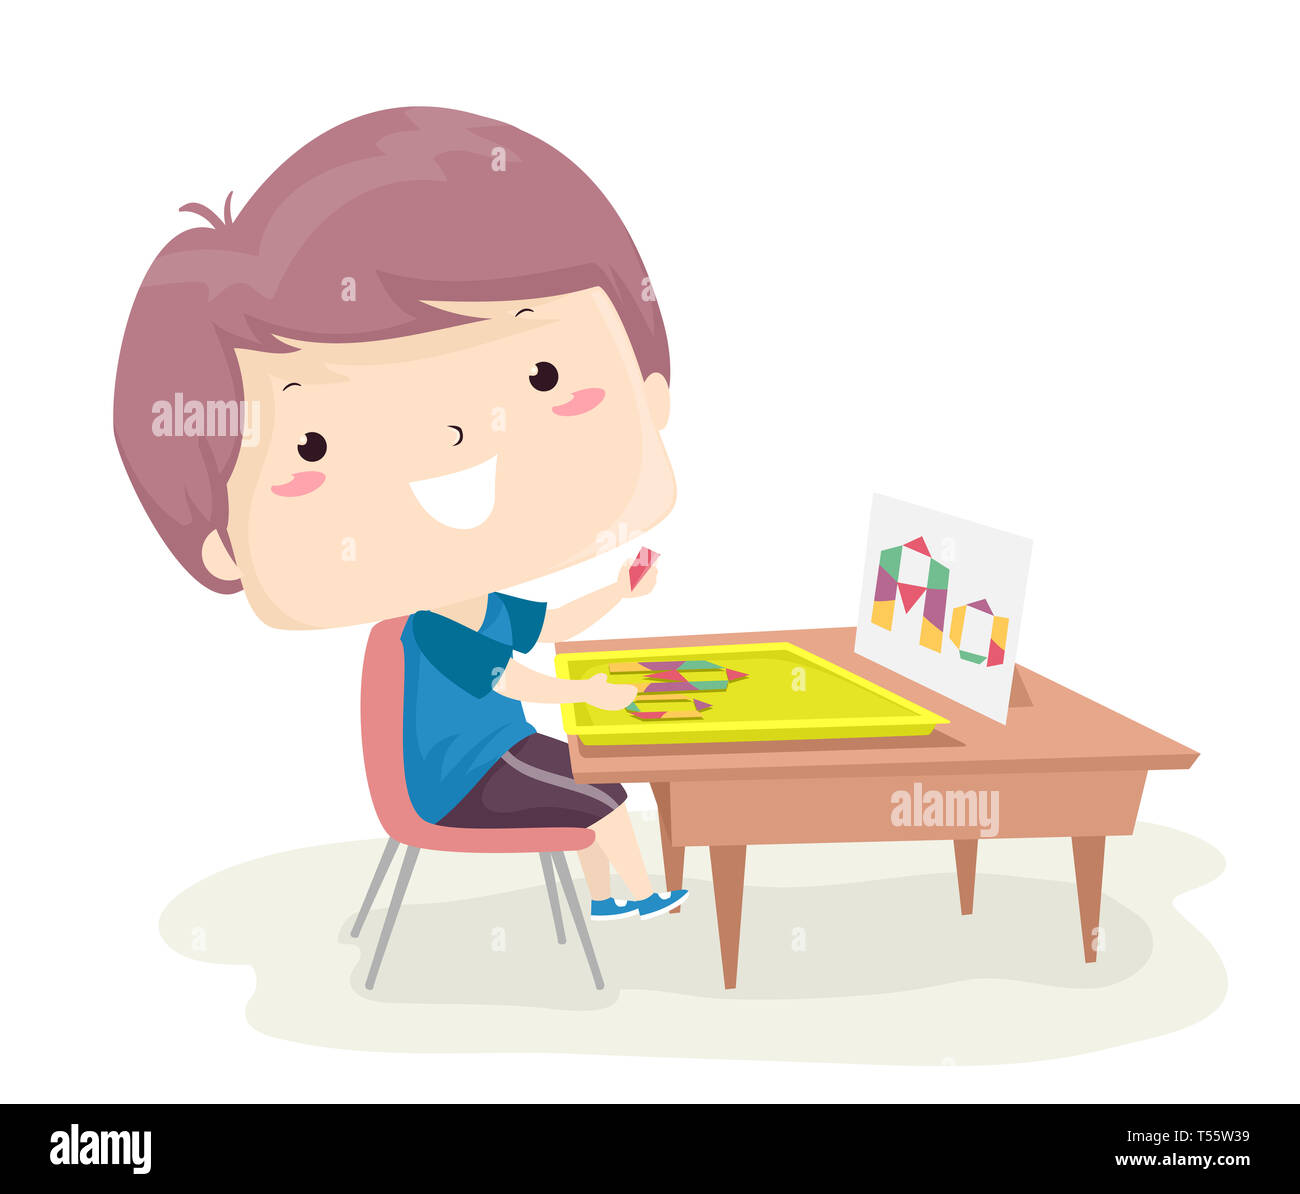 Illustration of a Kid Boy Using Geometric Shape Pattern Blocks and Making the Letter A Stock Photo